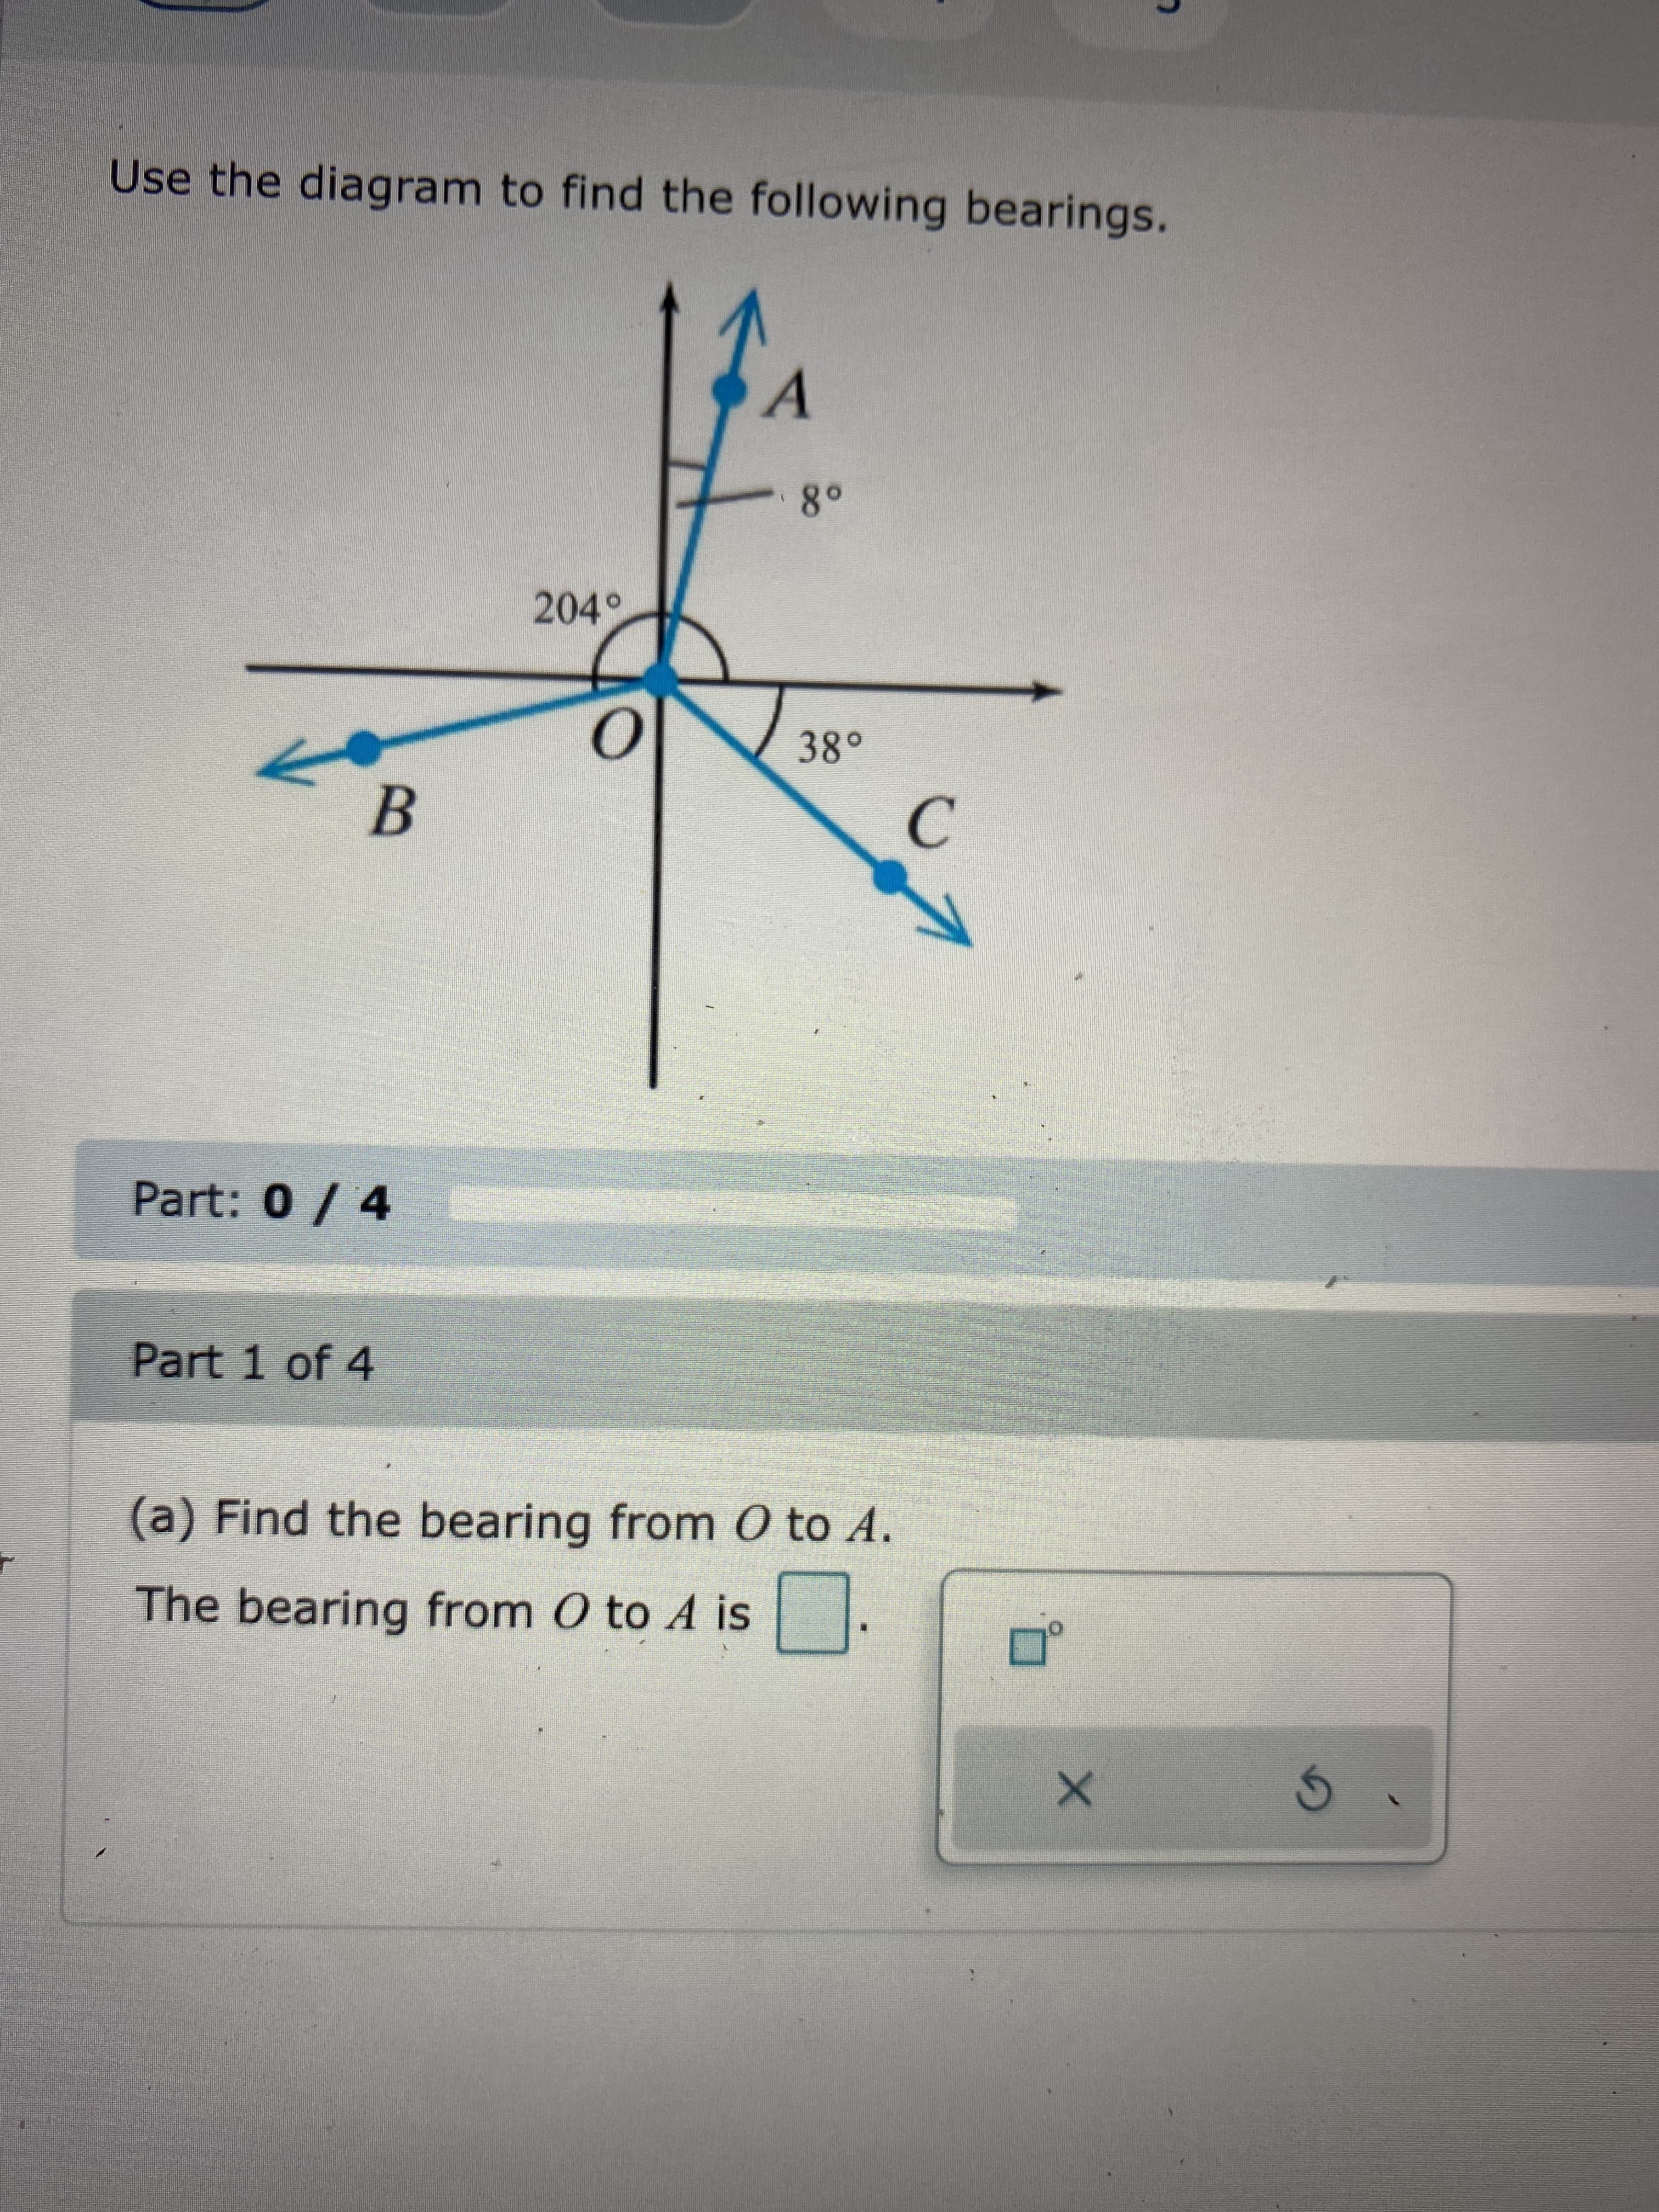 (a) Find the bearing from 0 to A.
The bearing from O to A is
